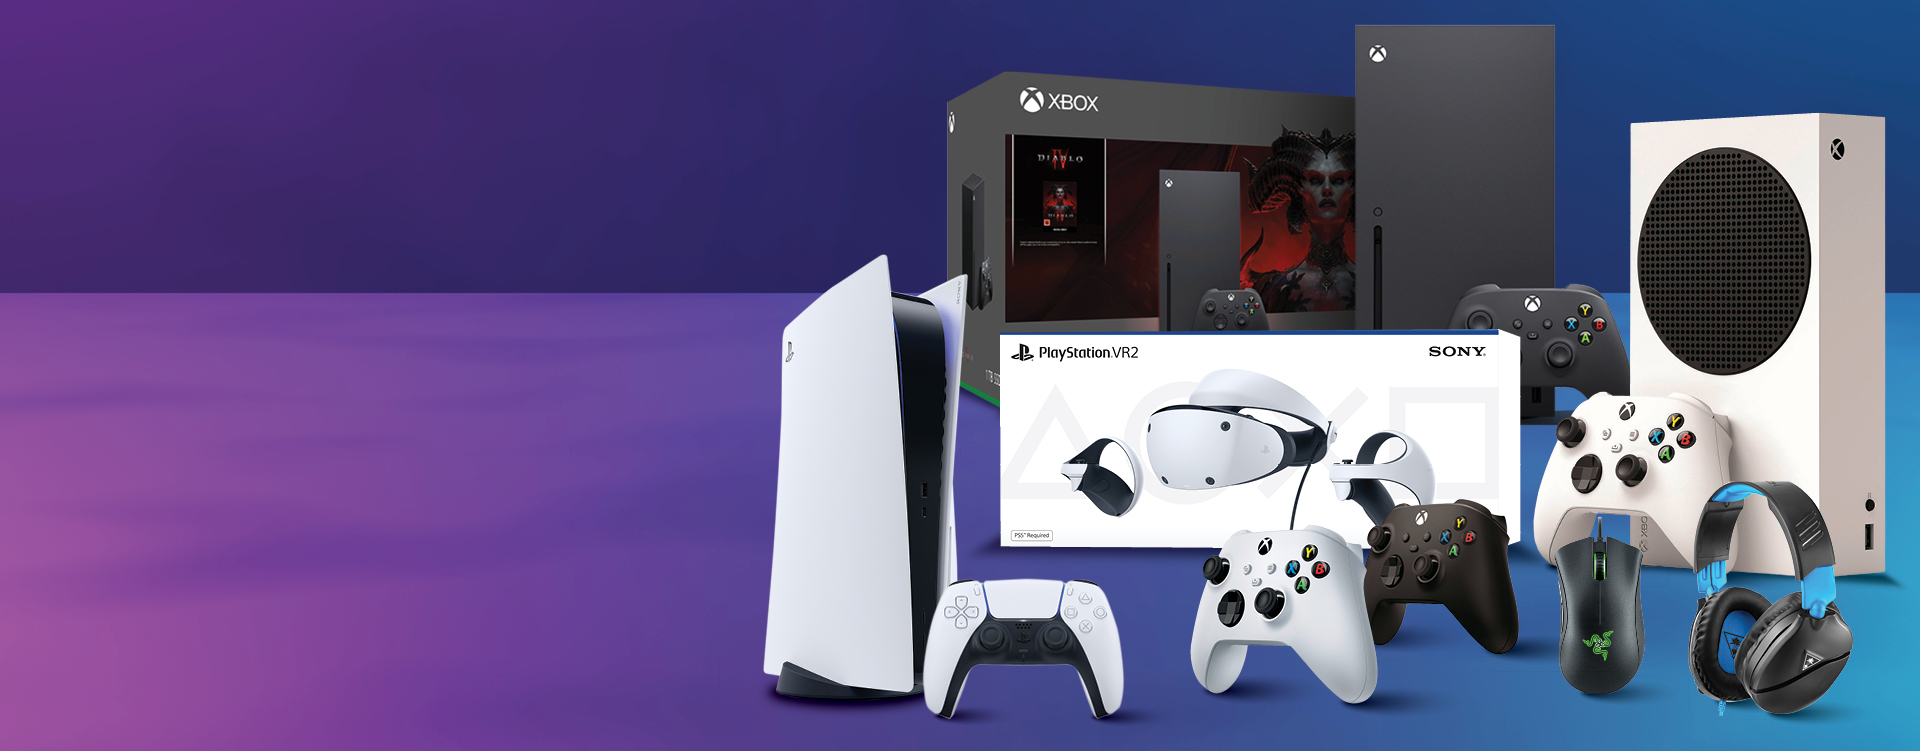 THE GAMING RANGE. LEVEL UP WITH ESSENTIAL GAMING GEAR AT THE LOWEST PRICES GUARANTEED While stocks last. Ts & Cs apply.